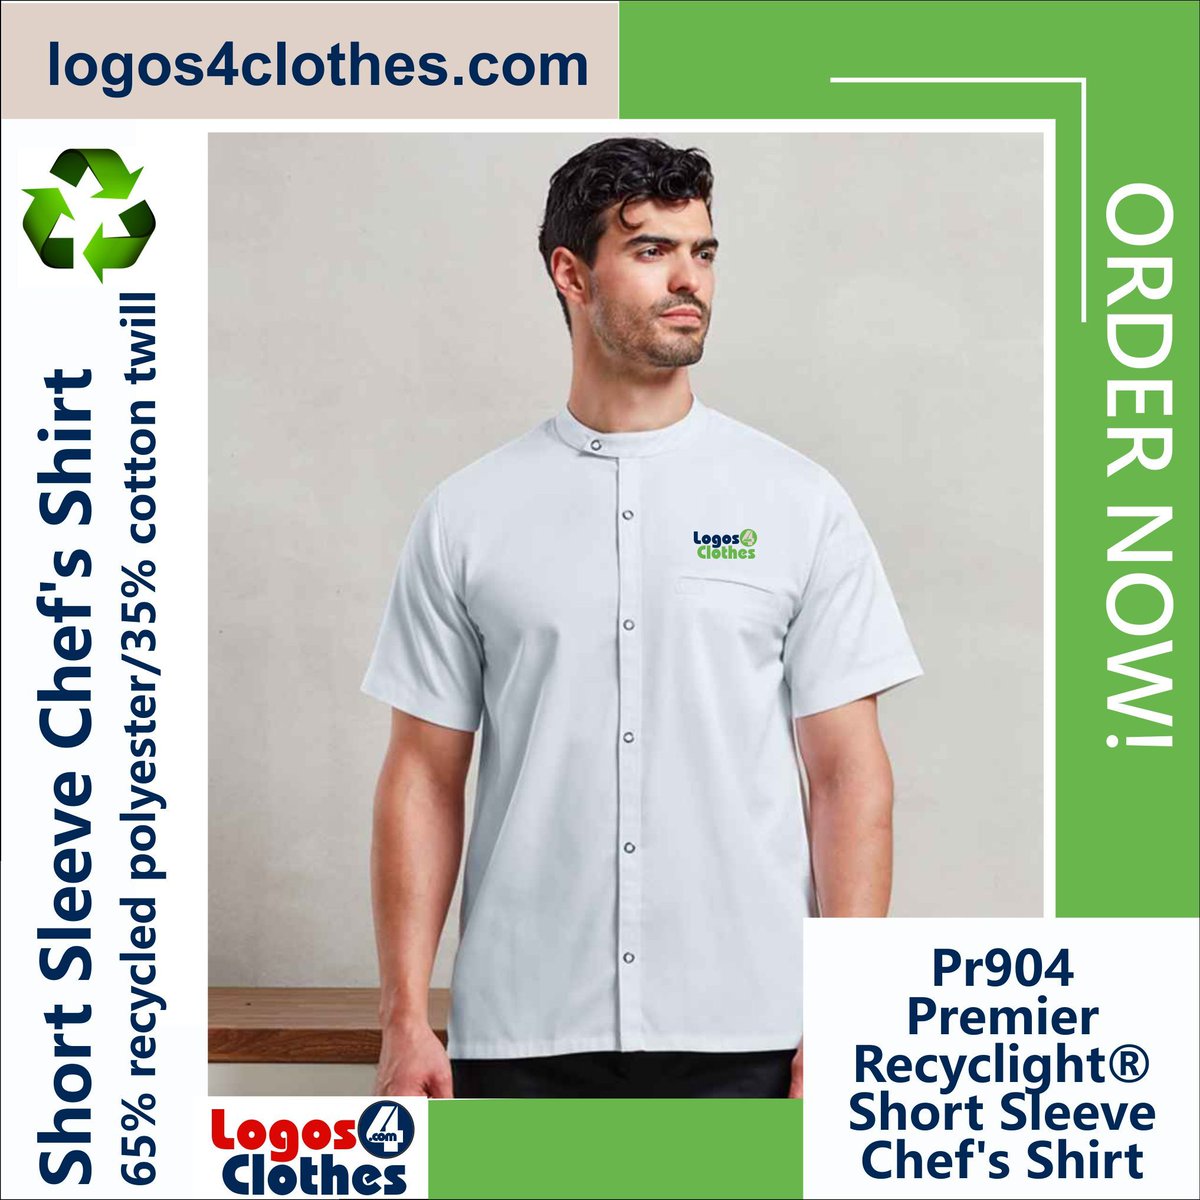 Sustainable & Organic Chefs  Clothing
Embroidered or Printed with the logo of your choice
Pr904 Premier Recyclight® Short Sleeve Chef's Shirt
buff.ly/499zBHB 
#personalisedchefsclothing #recycledchefsshirt #embroideredshirts
#personalisedclothing #embroideredclothing